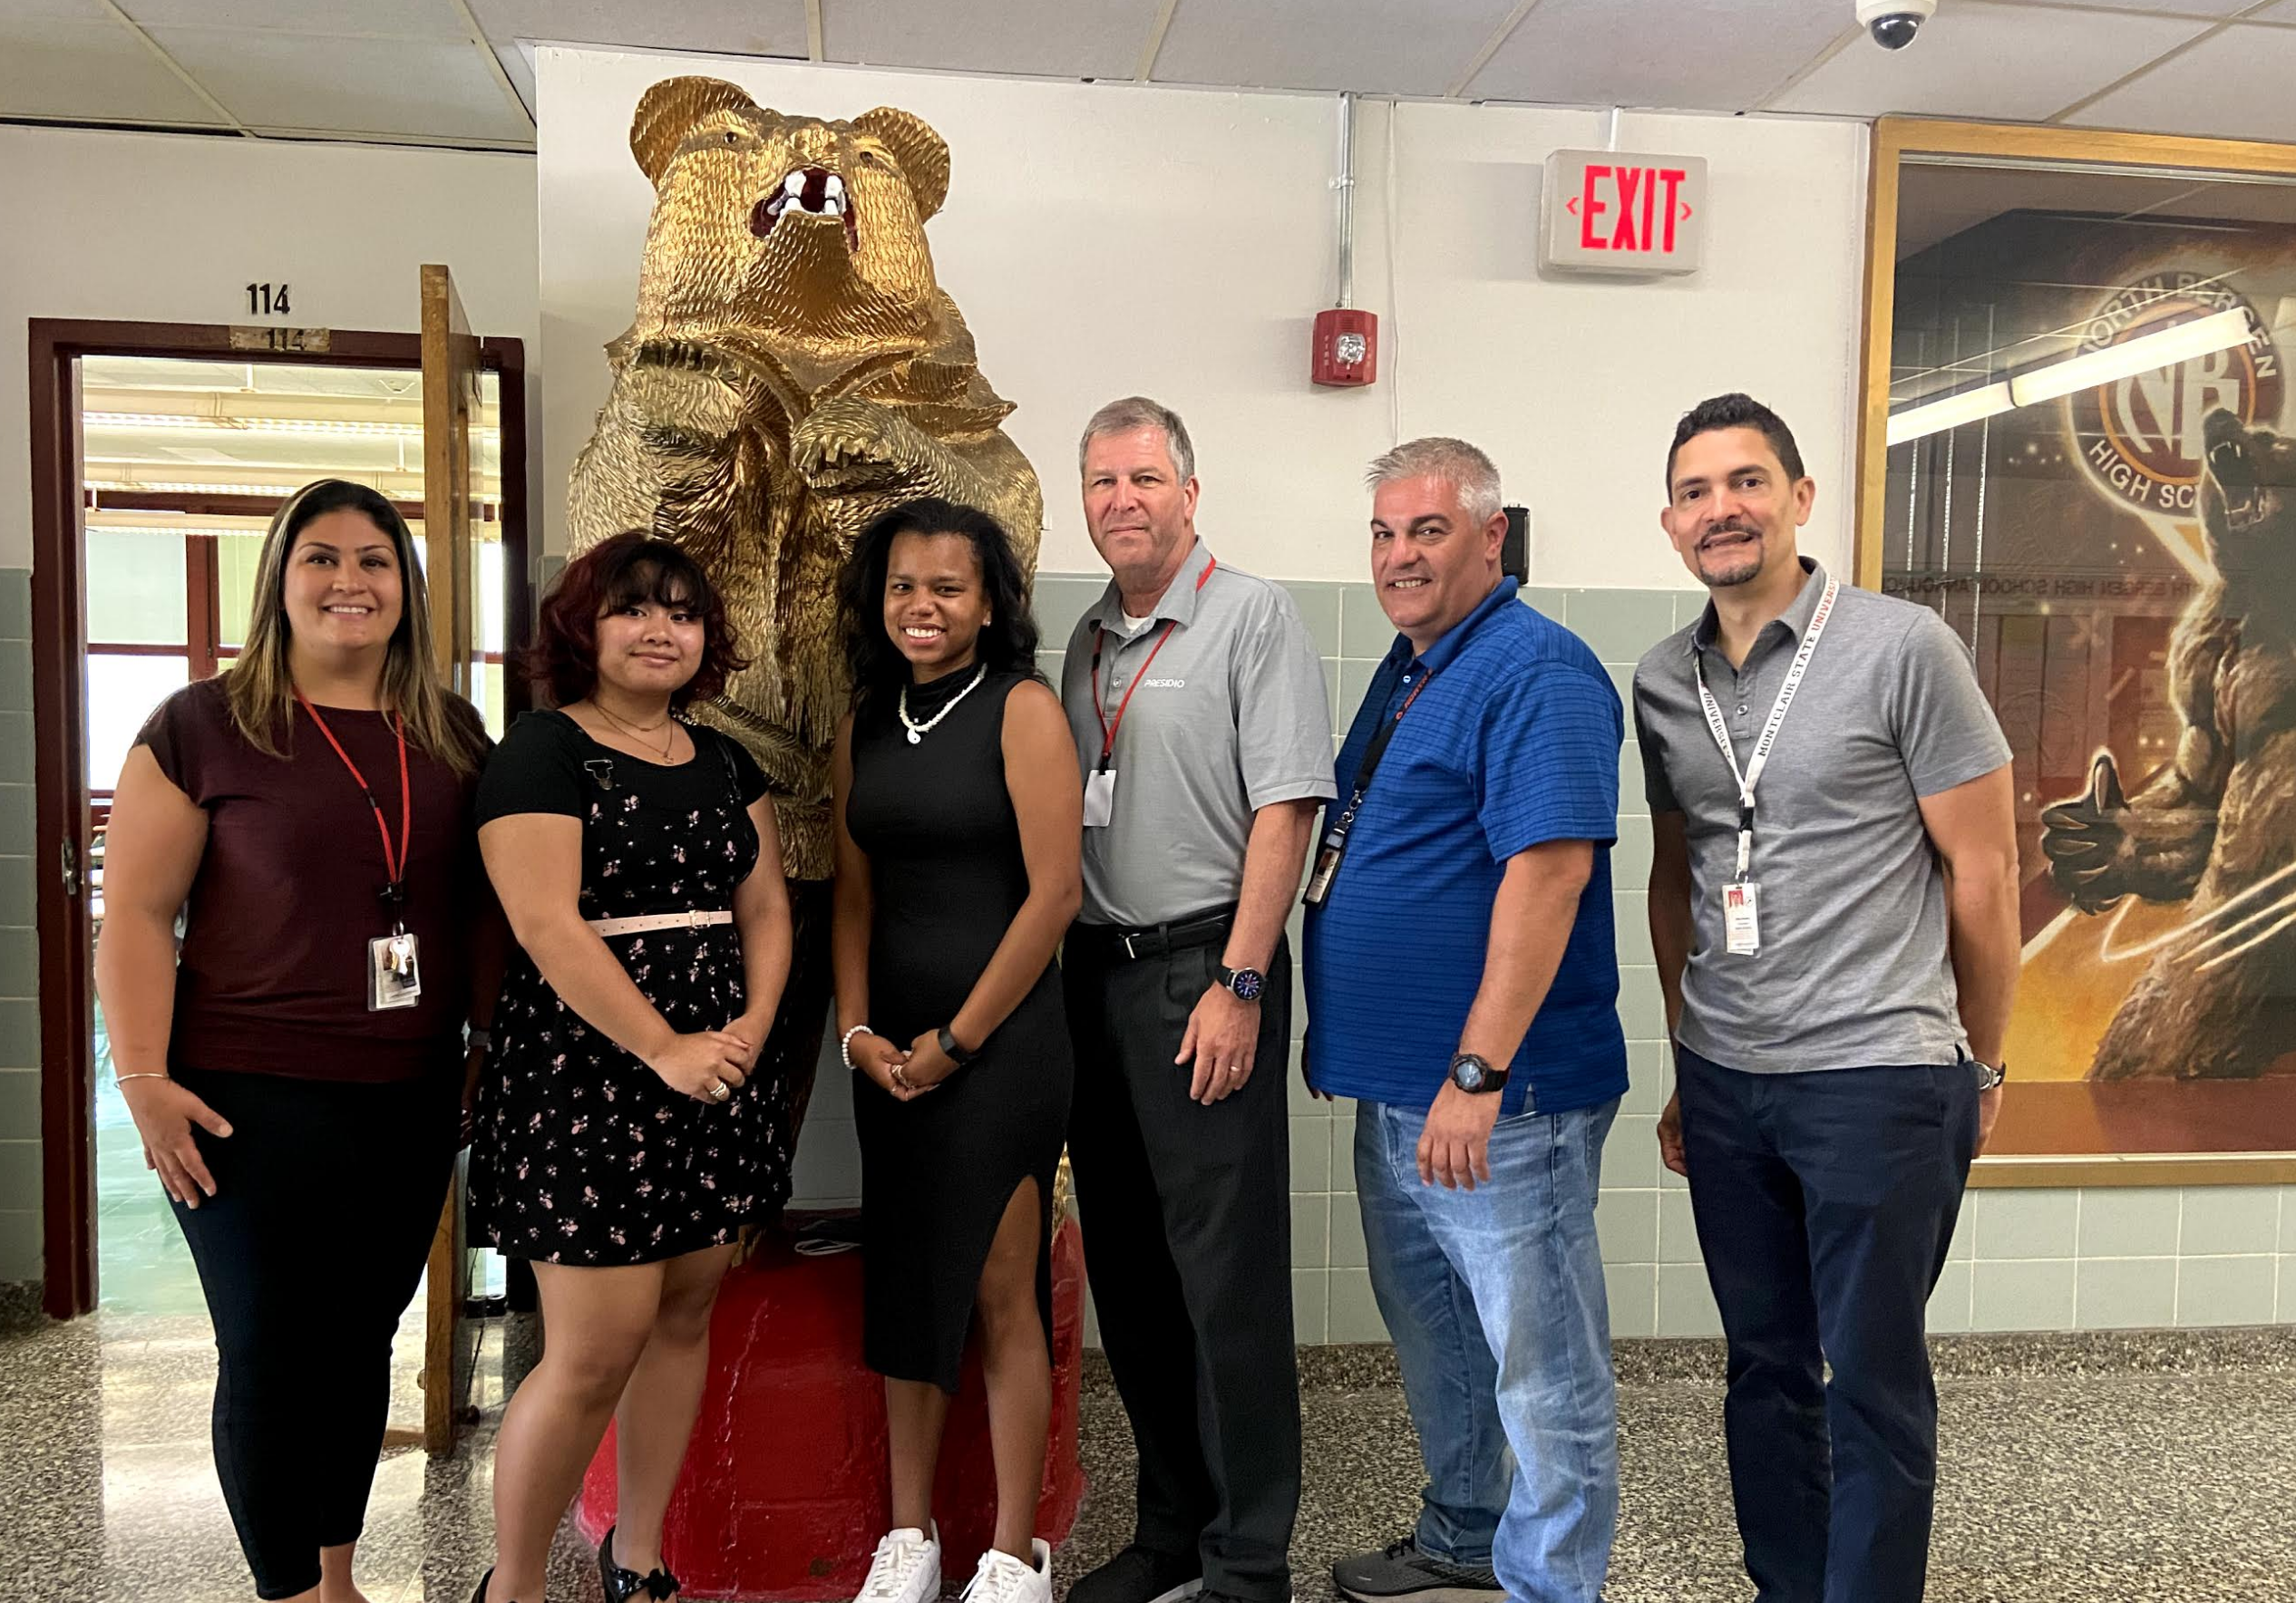 This year’s graduation celebration at North Bergen High School included the awarding of Palisades Medical Center’s annual scholarships to Adreany Sihombing and Michelle Franklin